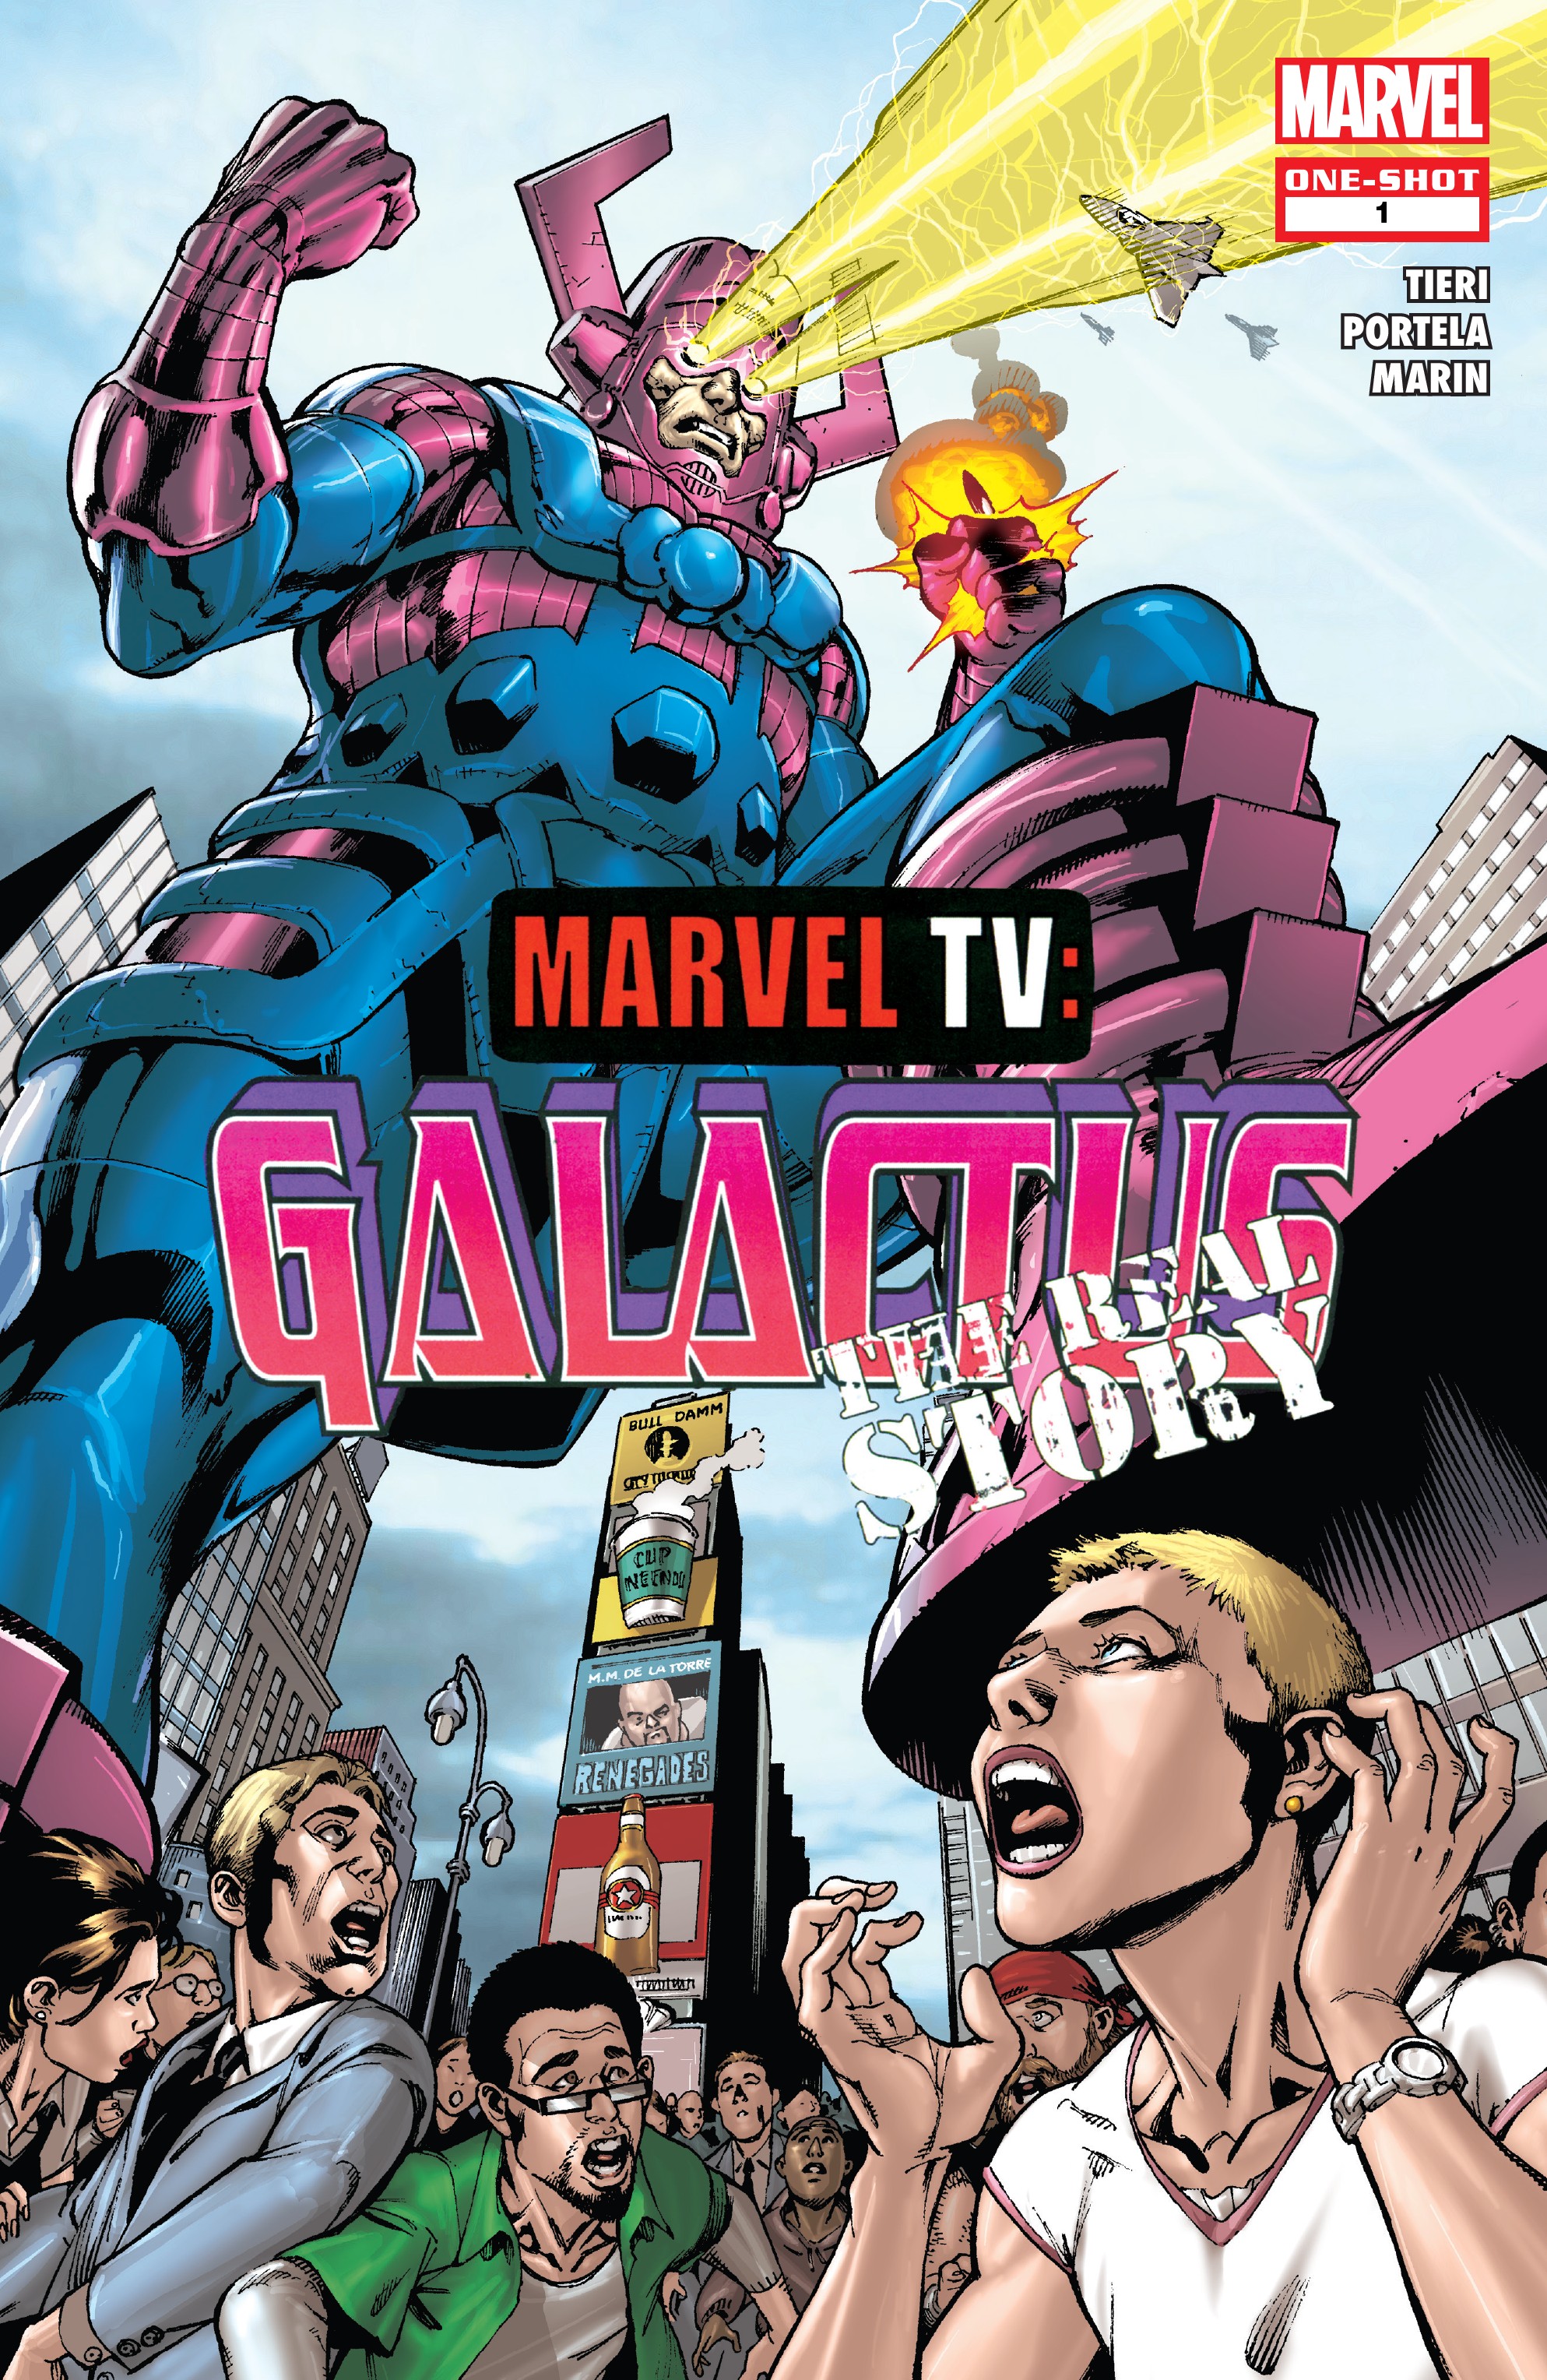 Read online Marvel TV: Galactus - The Real Story comic -  Issue # Full - 1